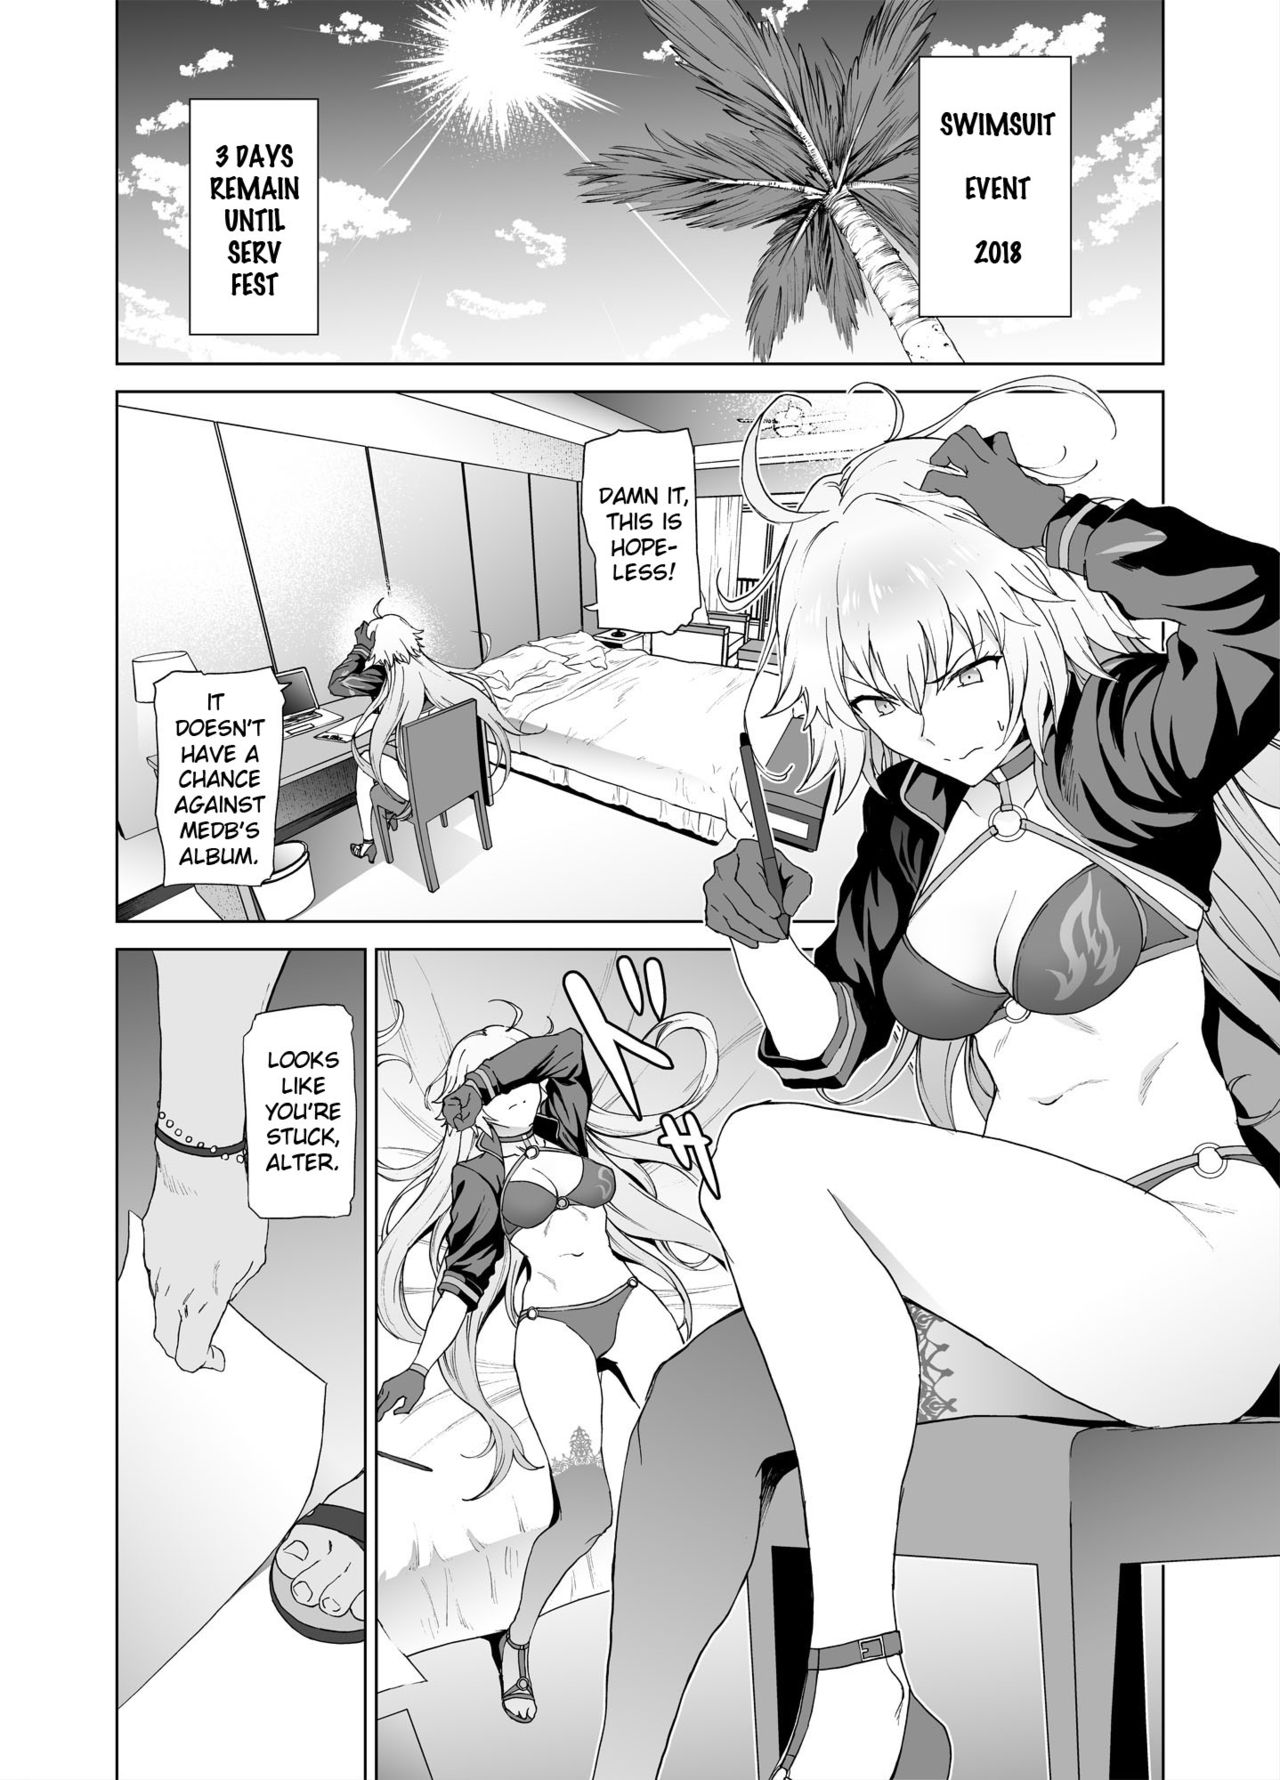 [EXTENDED PART (Endo Yoshiki)] Jeanne W (Fate/Grand Order) [Digital] (English) page 2 full